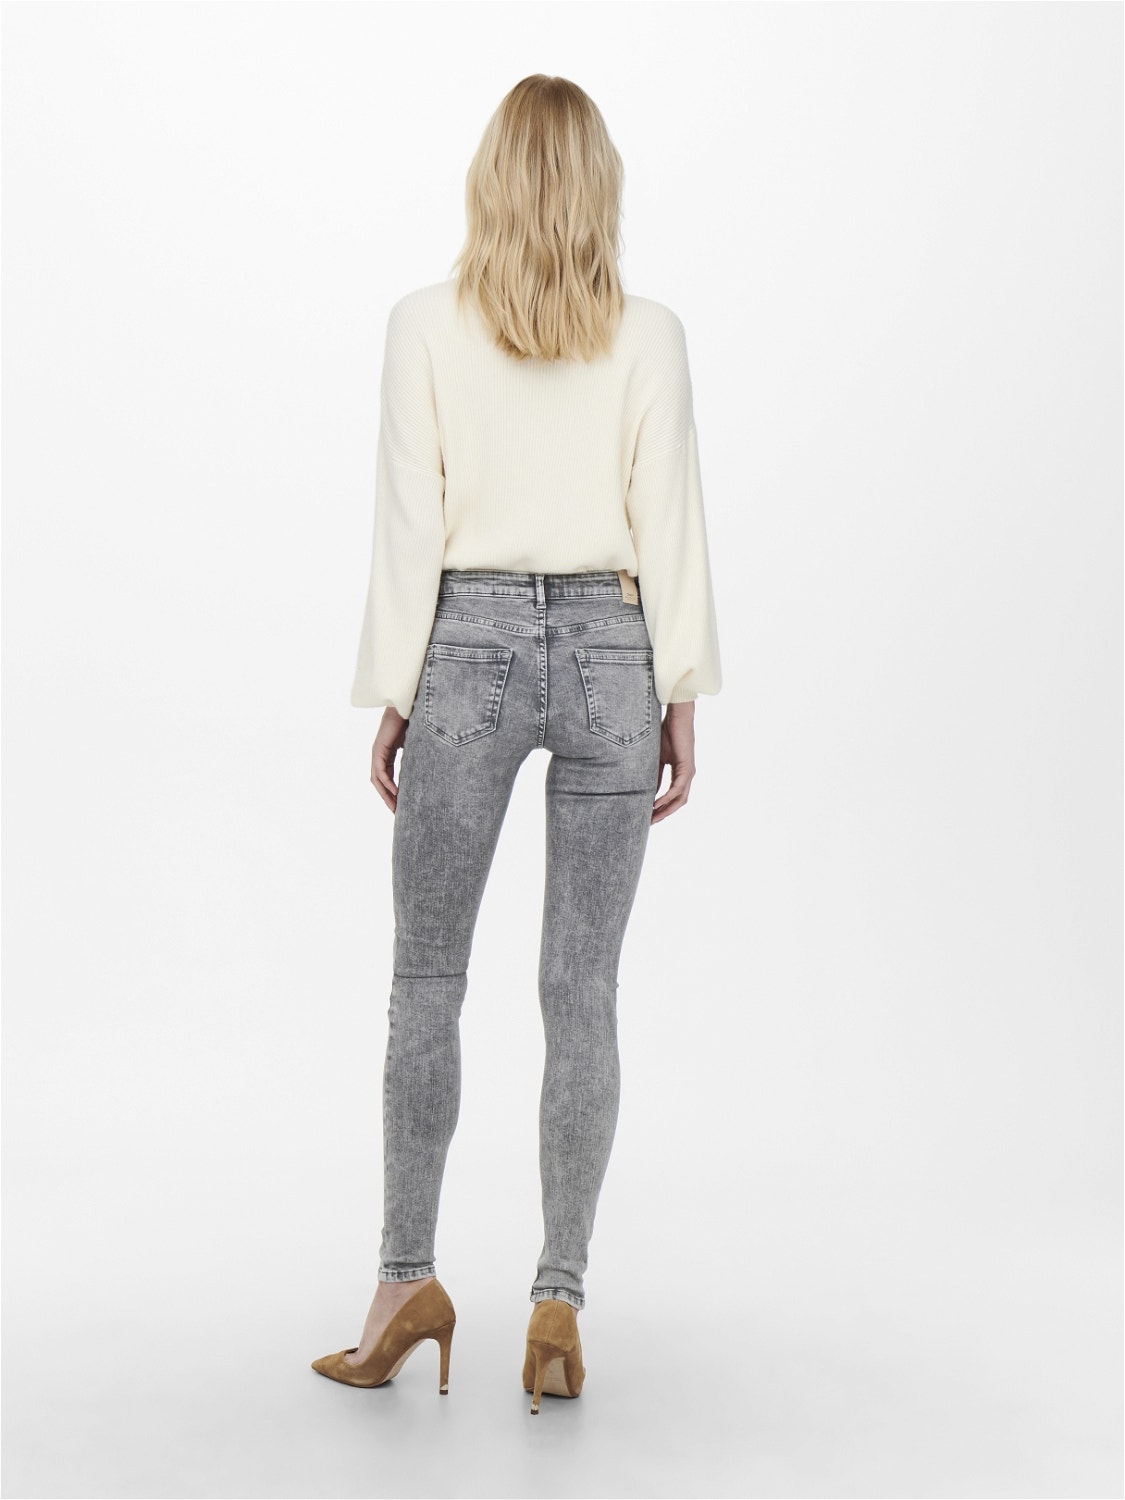 ONLY Jeans Skinny Fit Taille moyenne -Light Grey Denim - 15245366